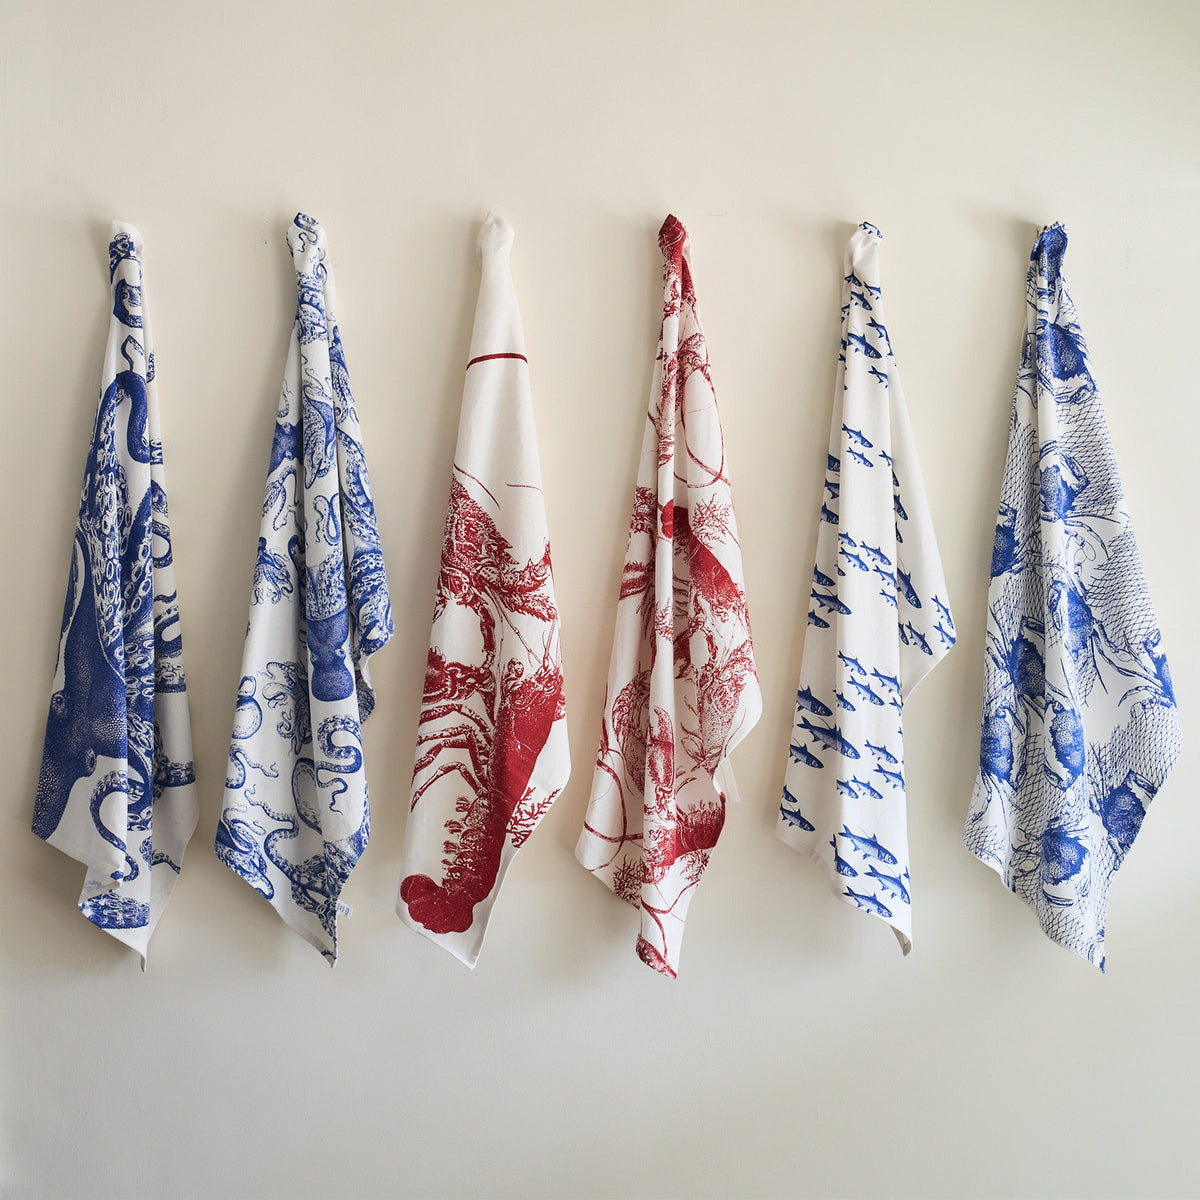 Seven School of Fish Kitchen Towels, Set of 2 with nautical themes hung in a row on a light-colored wall.